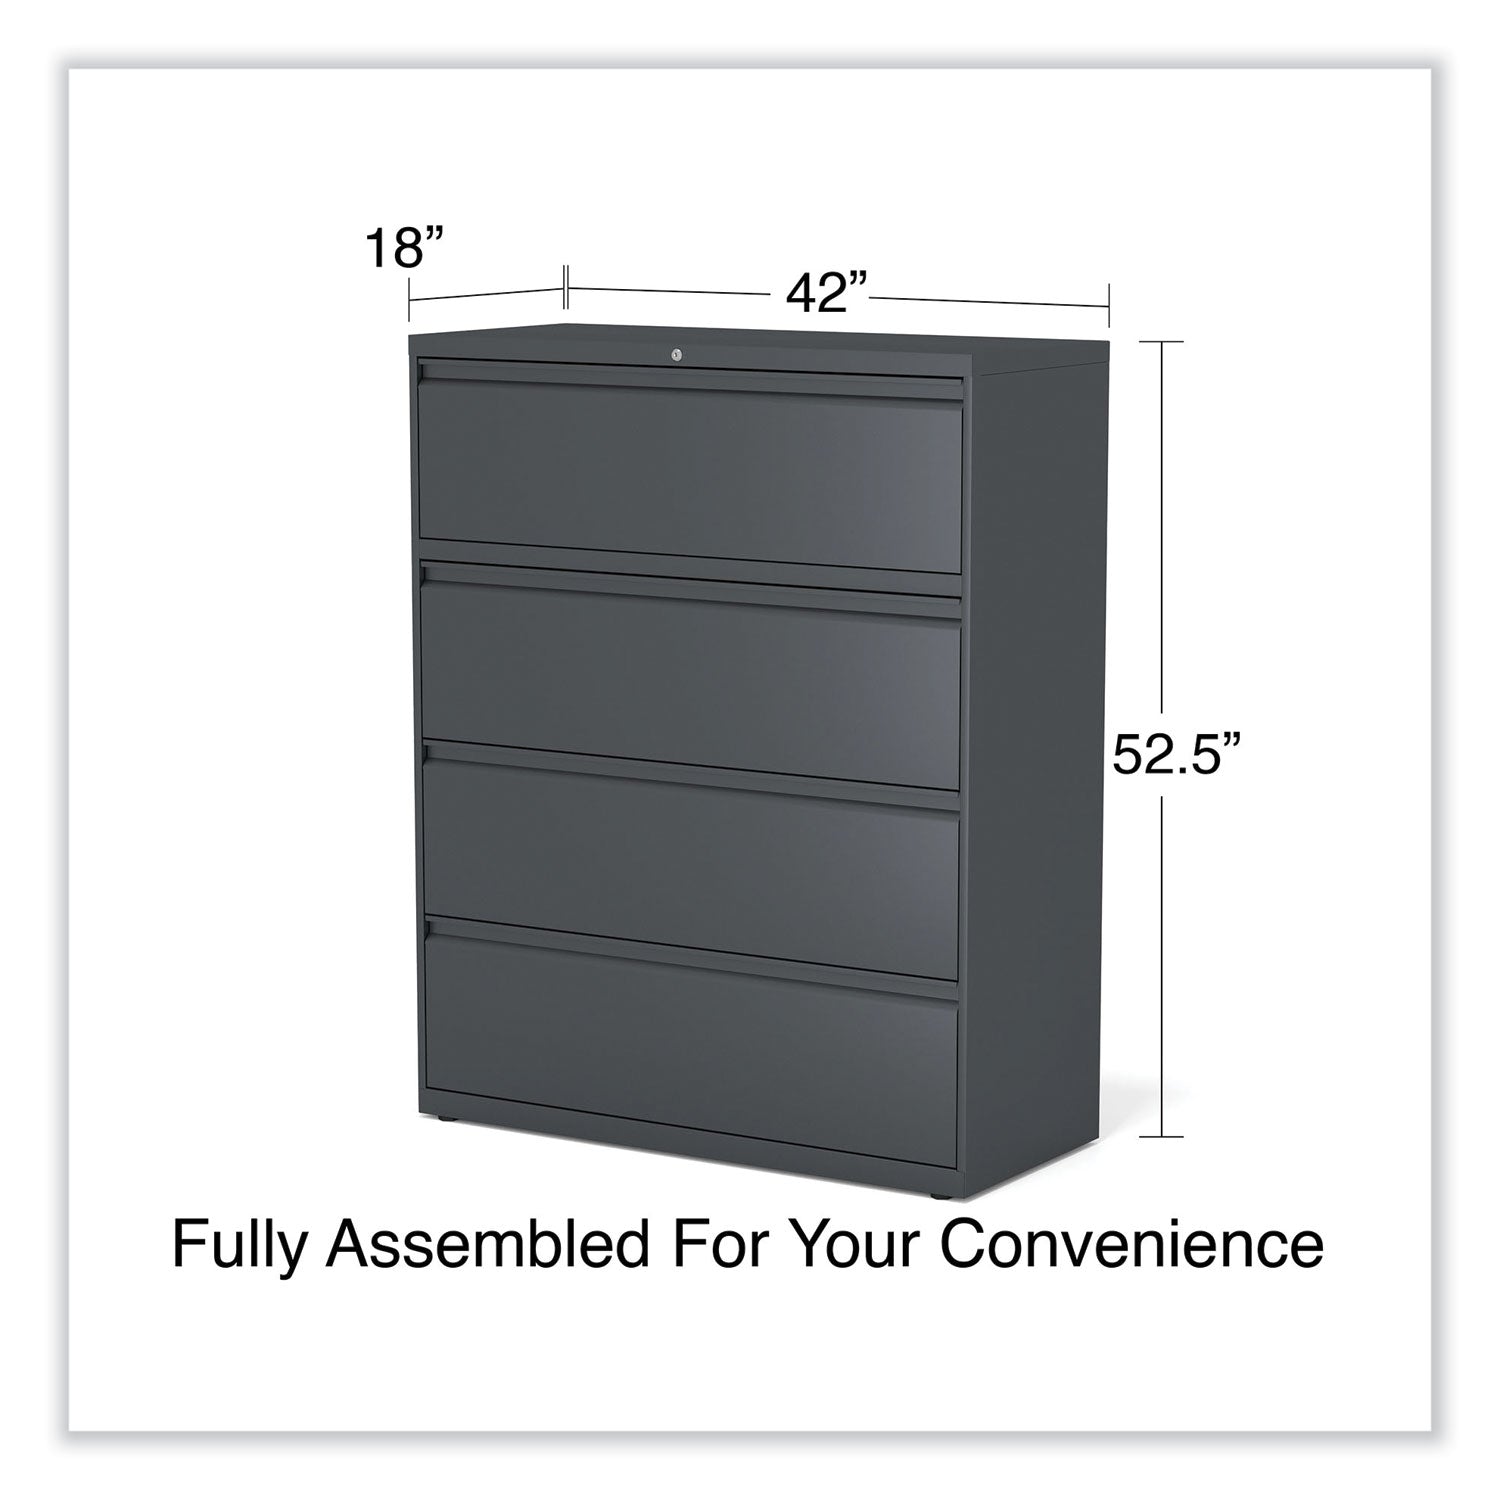 lateral-file-4-legal-letter-a4-a5-size-file-drawers-charcoal-42-x-1863-x-525_alehlf4254cc - 6